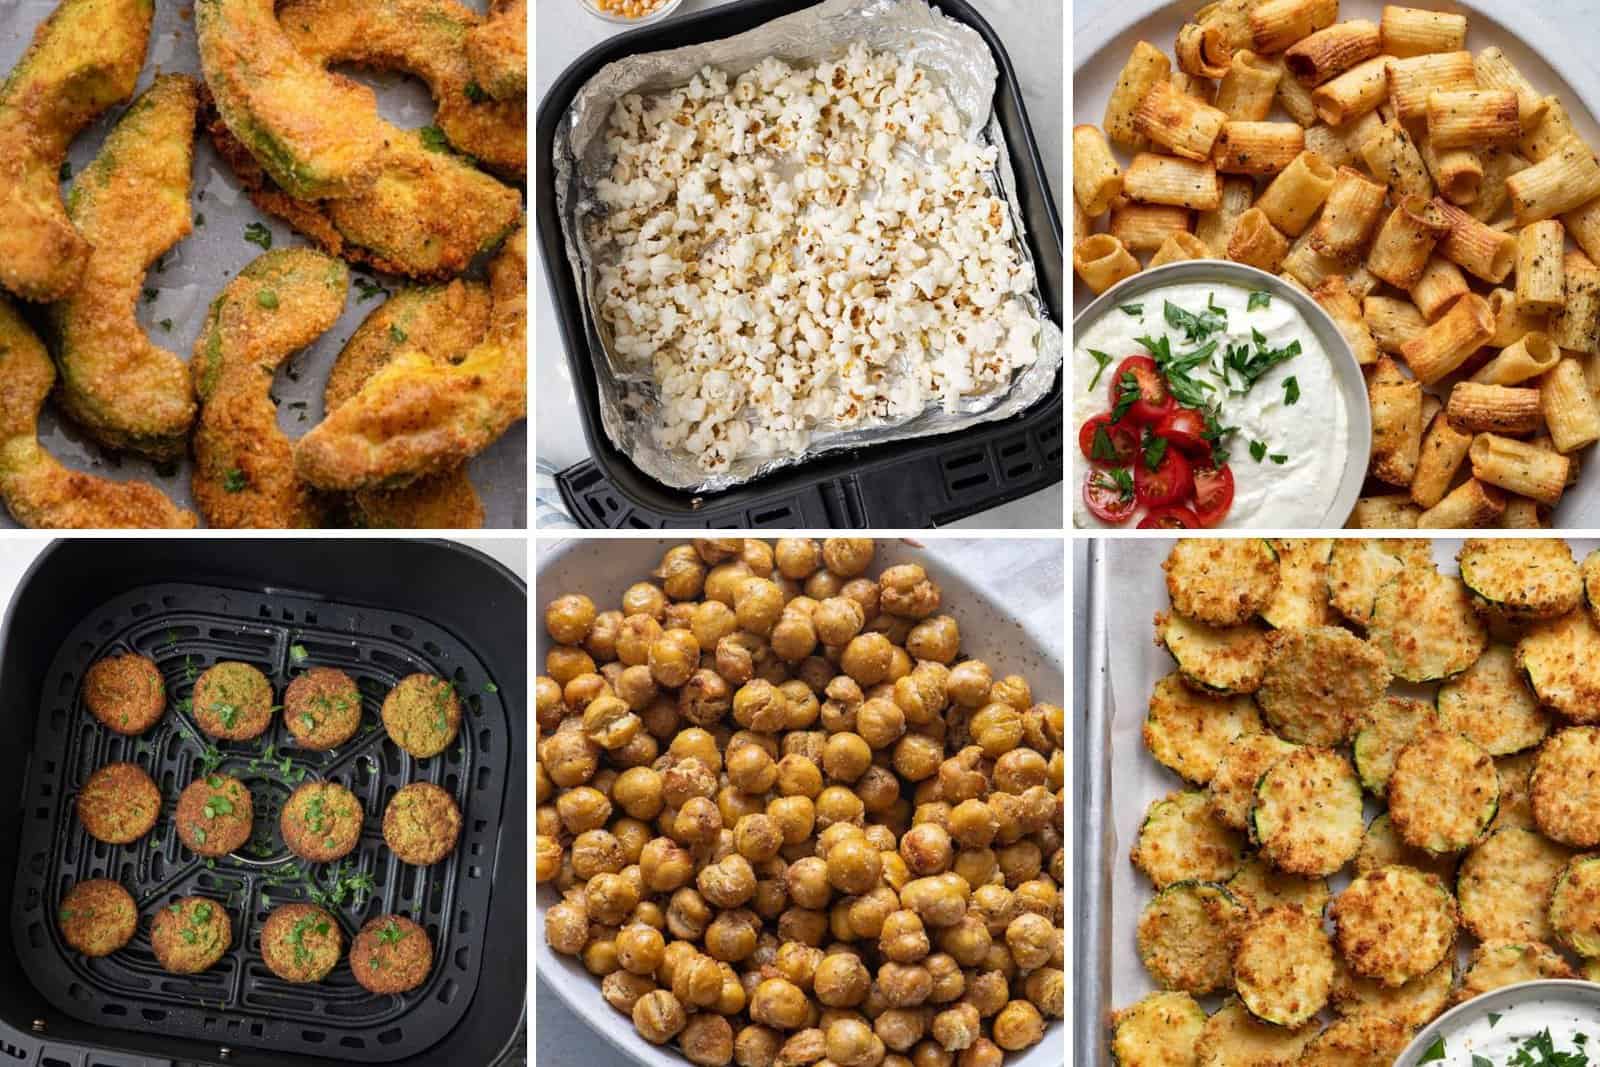 6 image collage of snack recipes made in an air fryer.